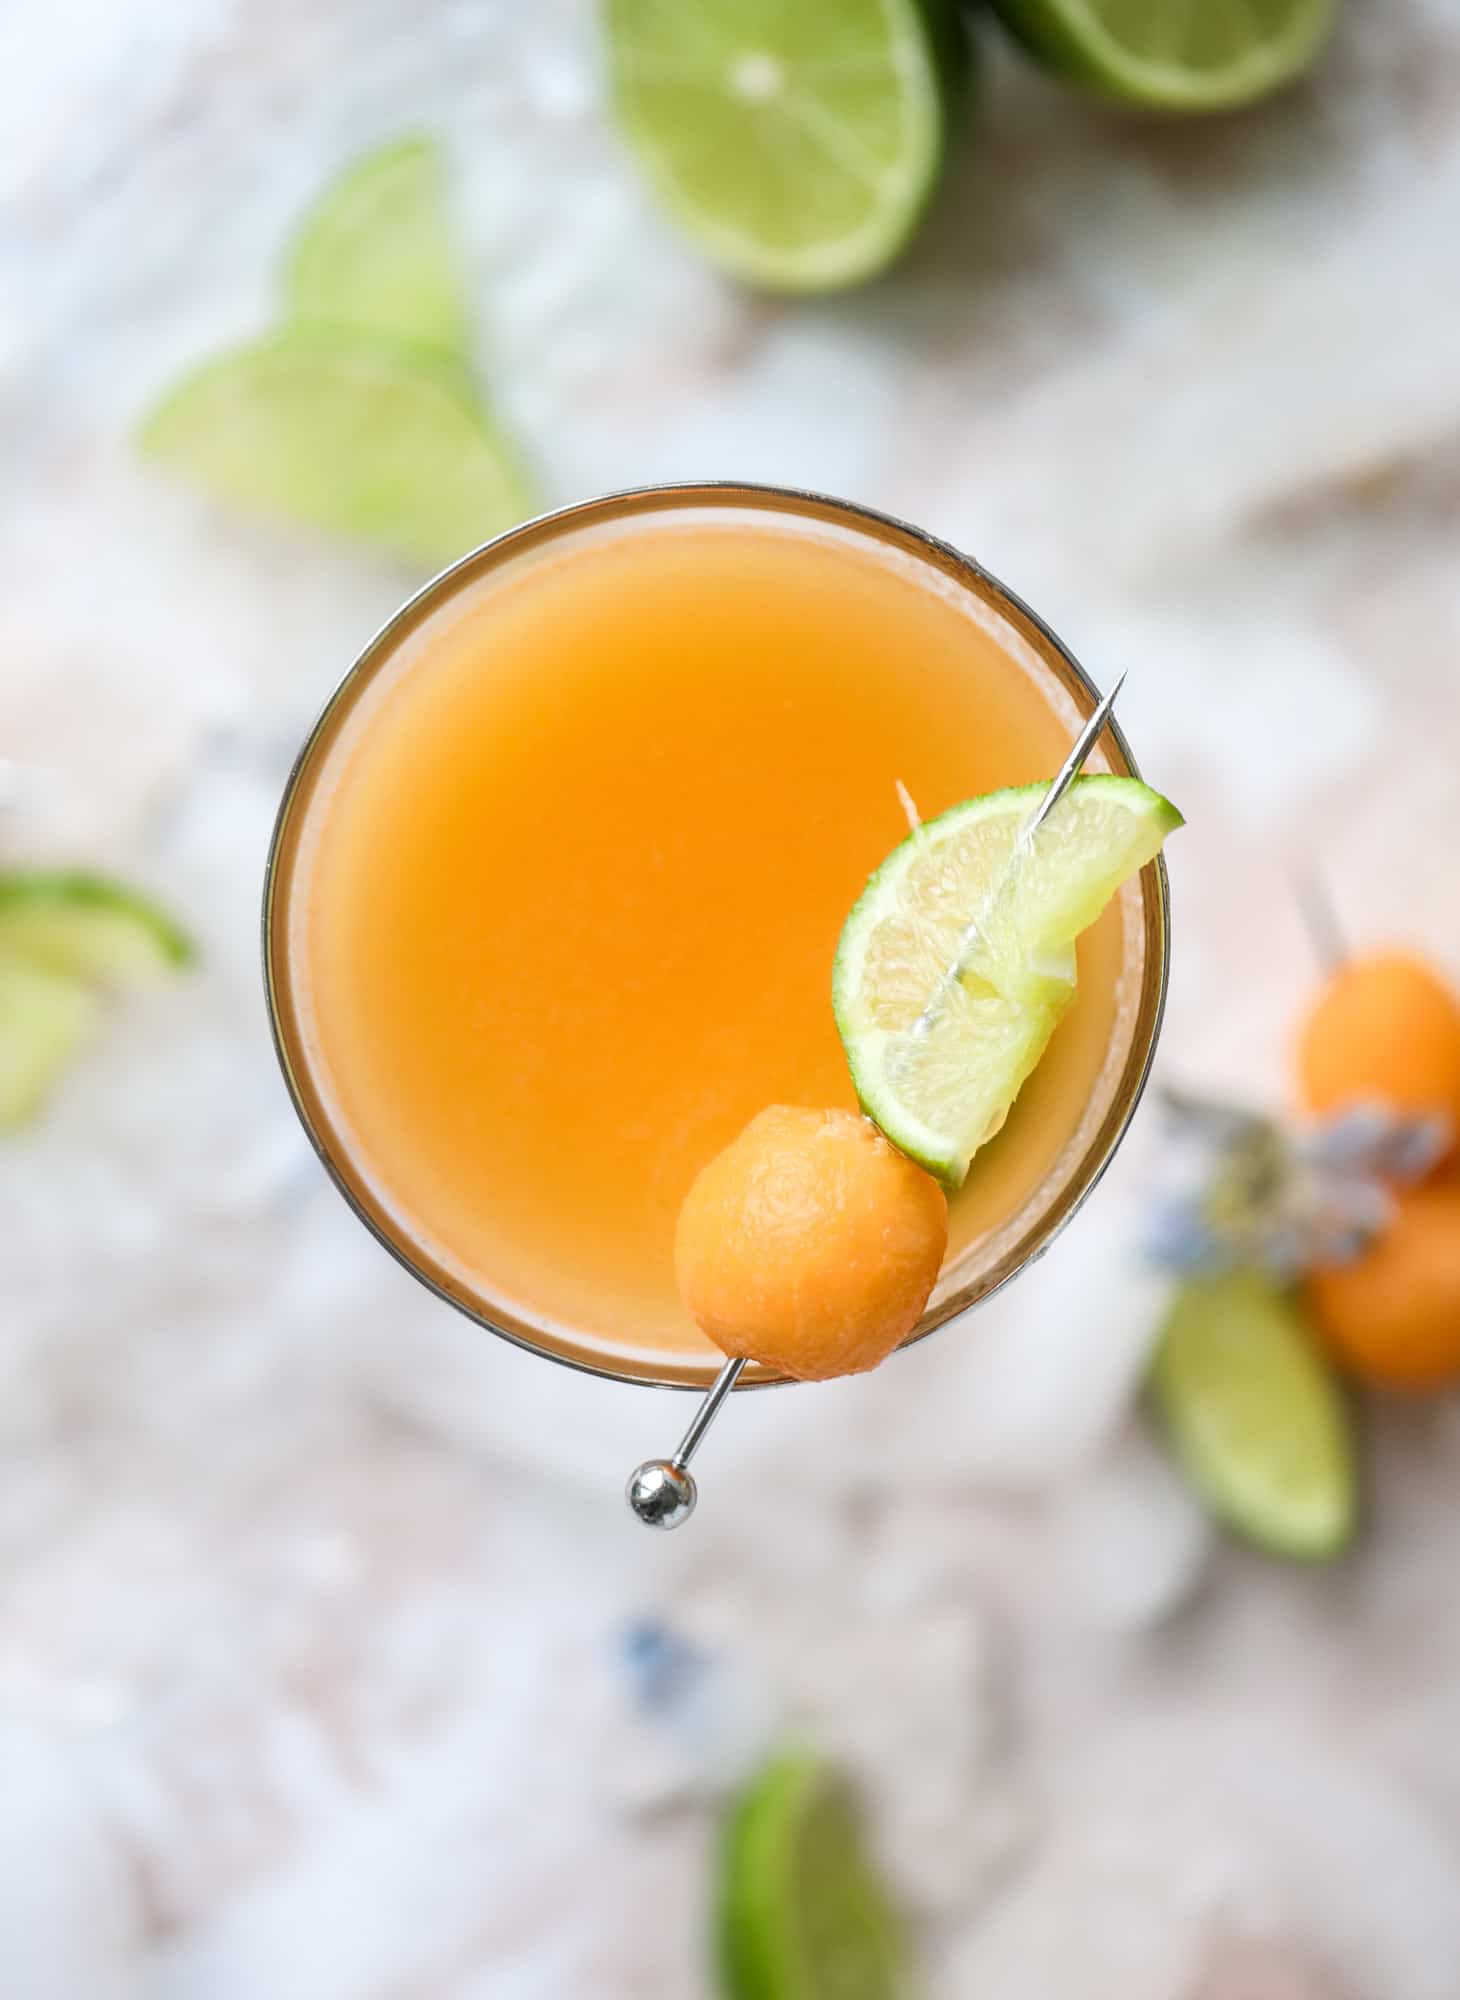 This cantaloupe daiquiri is the perfect way to celebrate summer! Freshly juiced melon, lime juice, rum and maraschino cherries - it's refreshing and cool and a fantastic cocktail to have during happy hour! Isn't the color amazing too?! I howsweeteats.com #cantaloupe #cocktail #daiquiri #lime #rum #summer